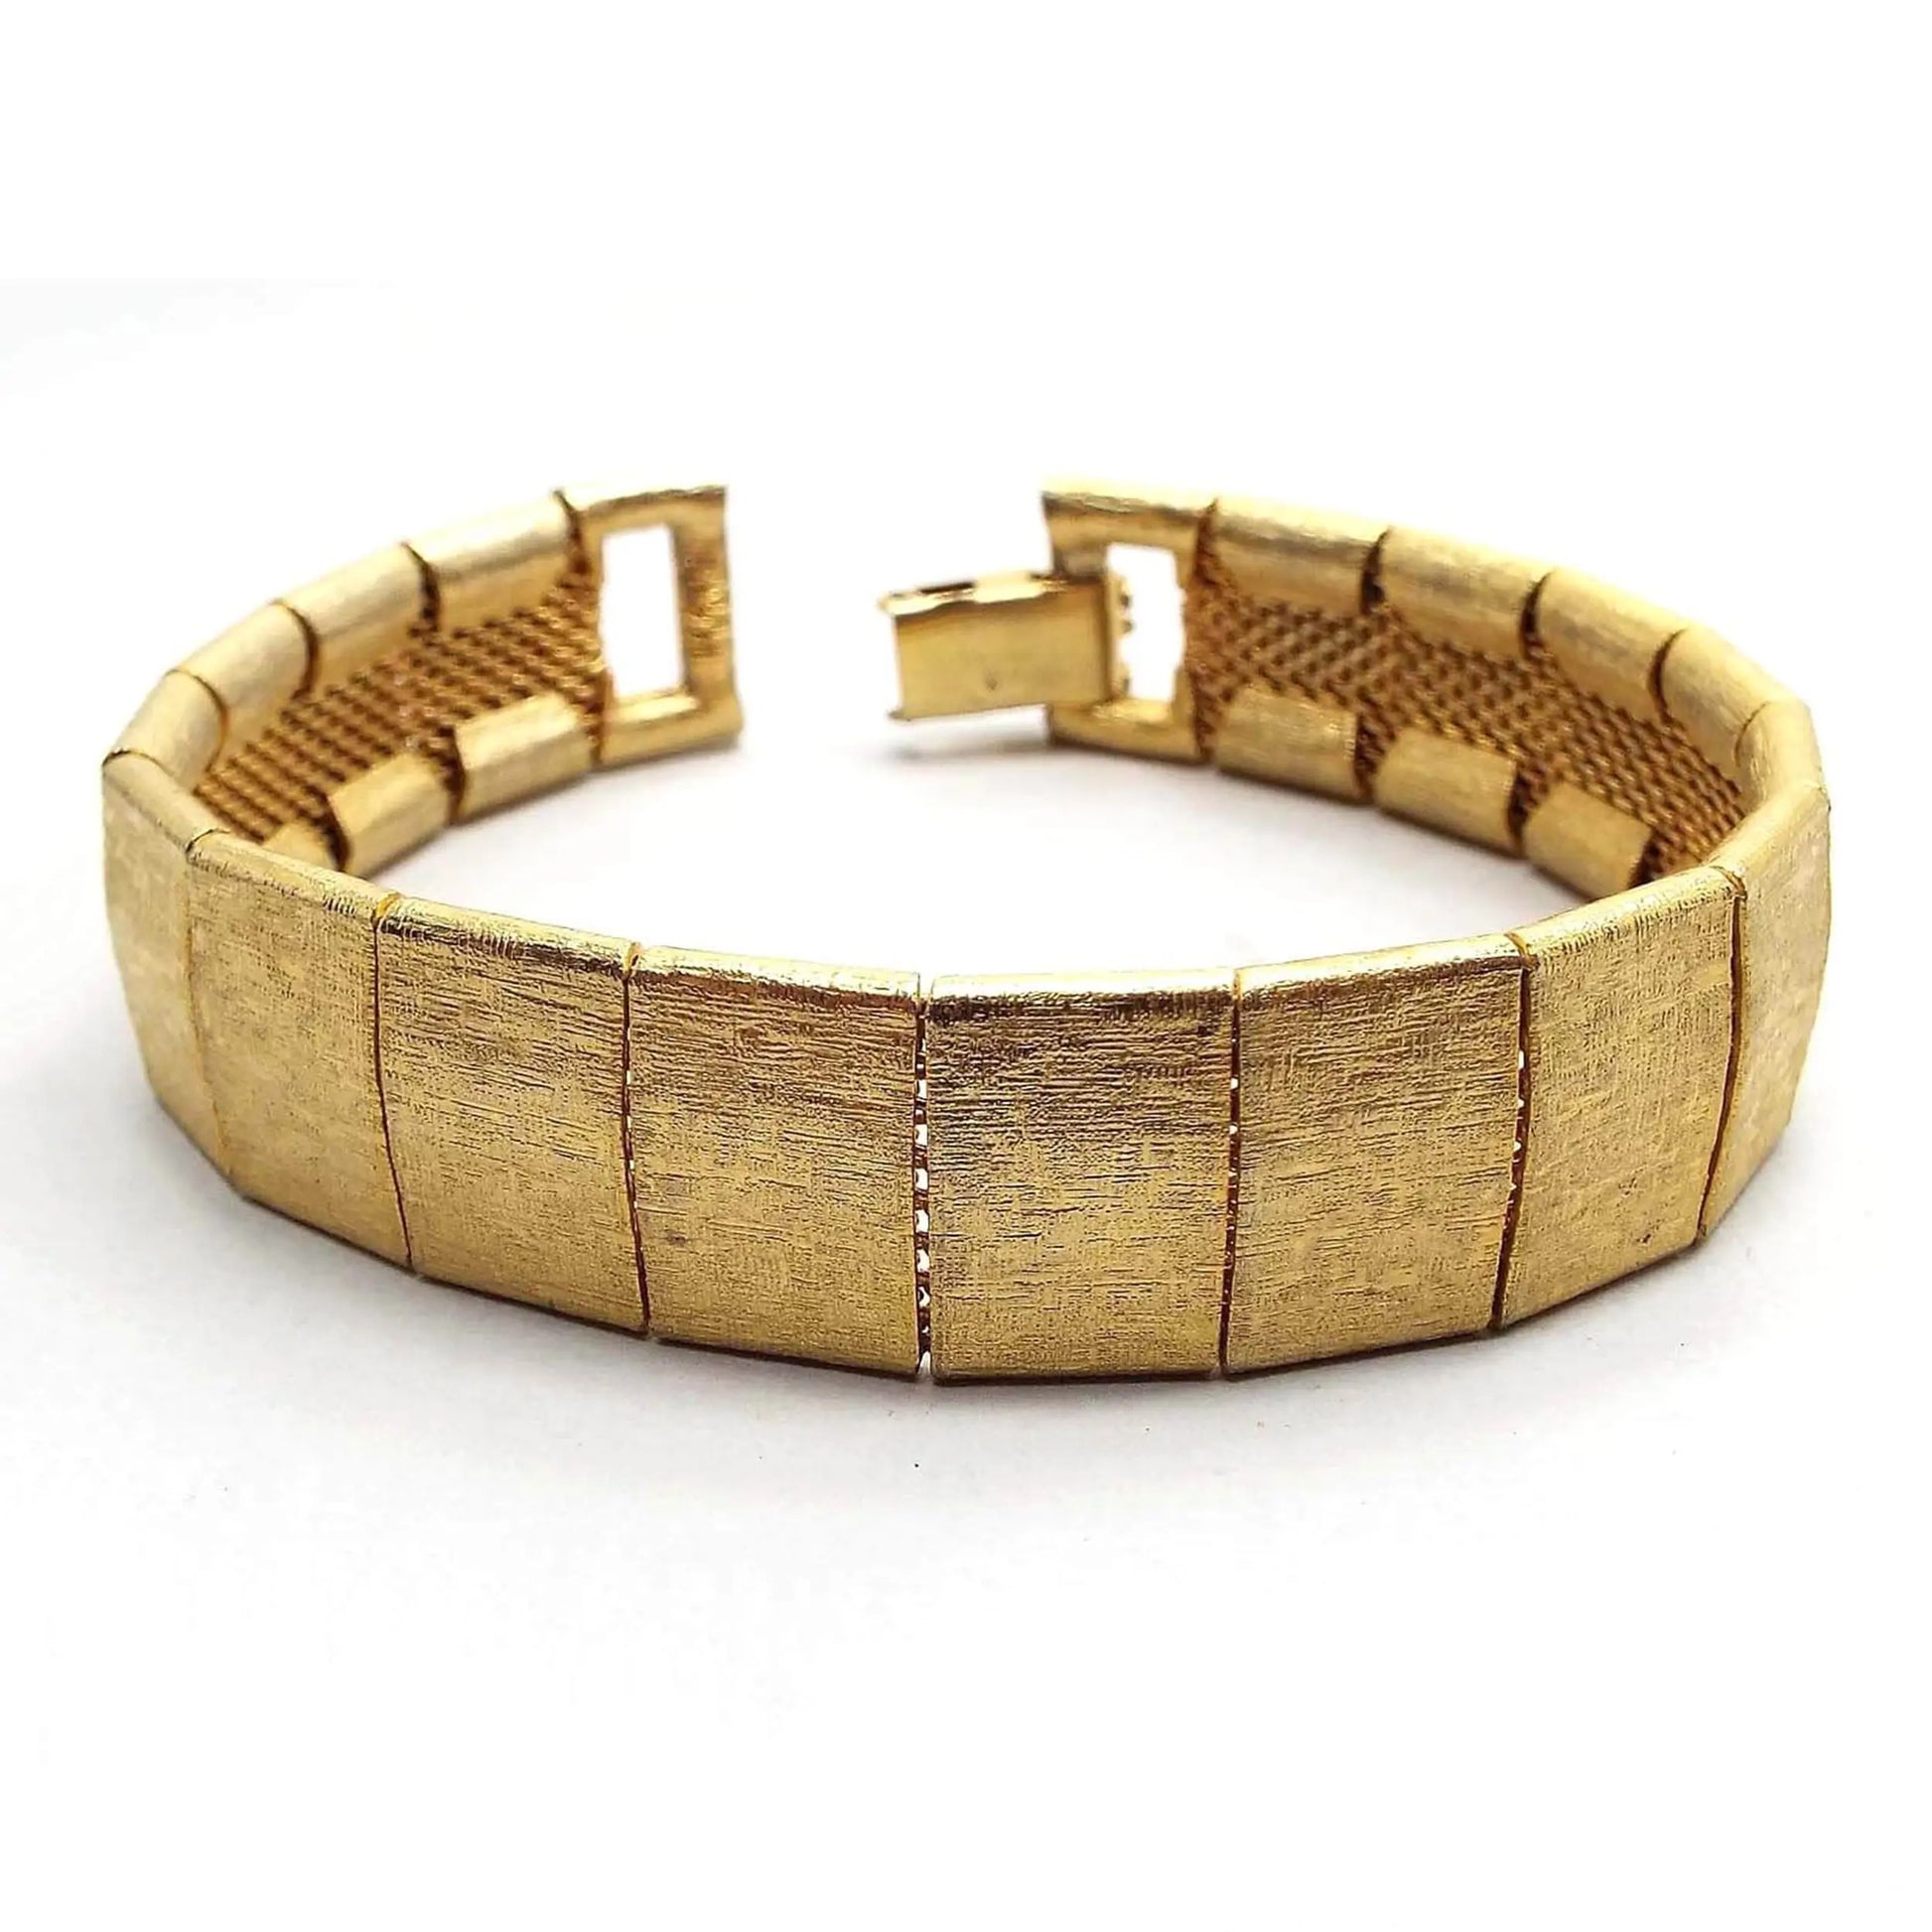 Angled top view of the retro vintage Emmons link bracelet. The bracelet has gold tone color wide links that have a brushed textured matte appearance. There is a snap lock clasp on the end.